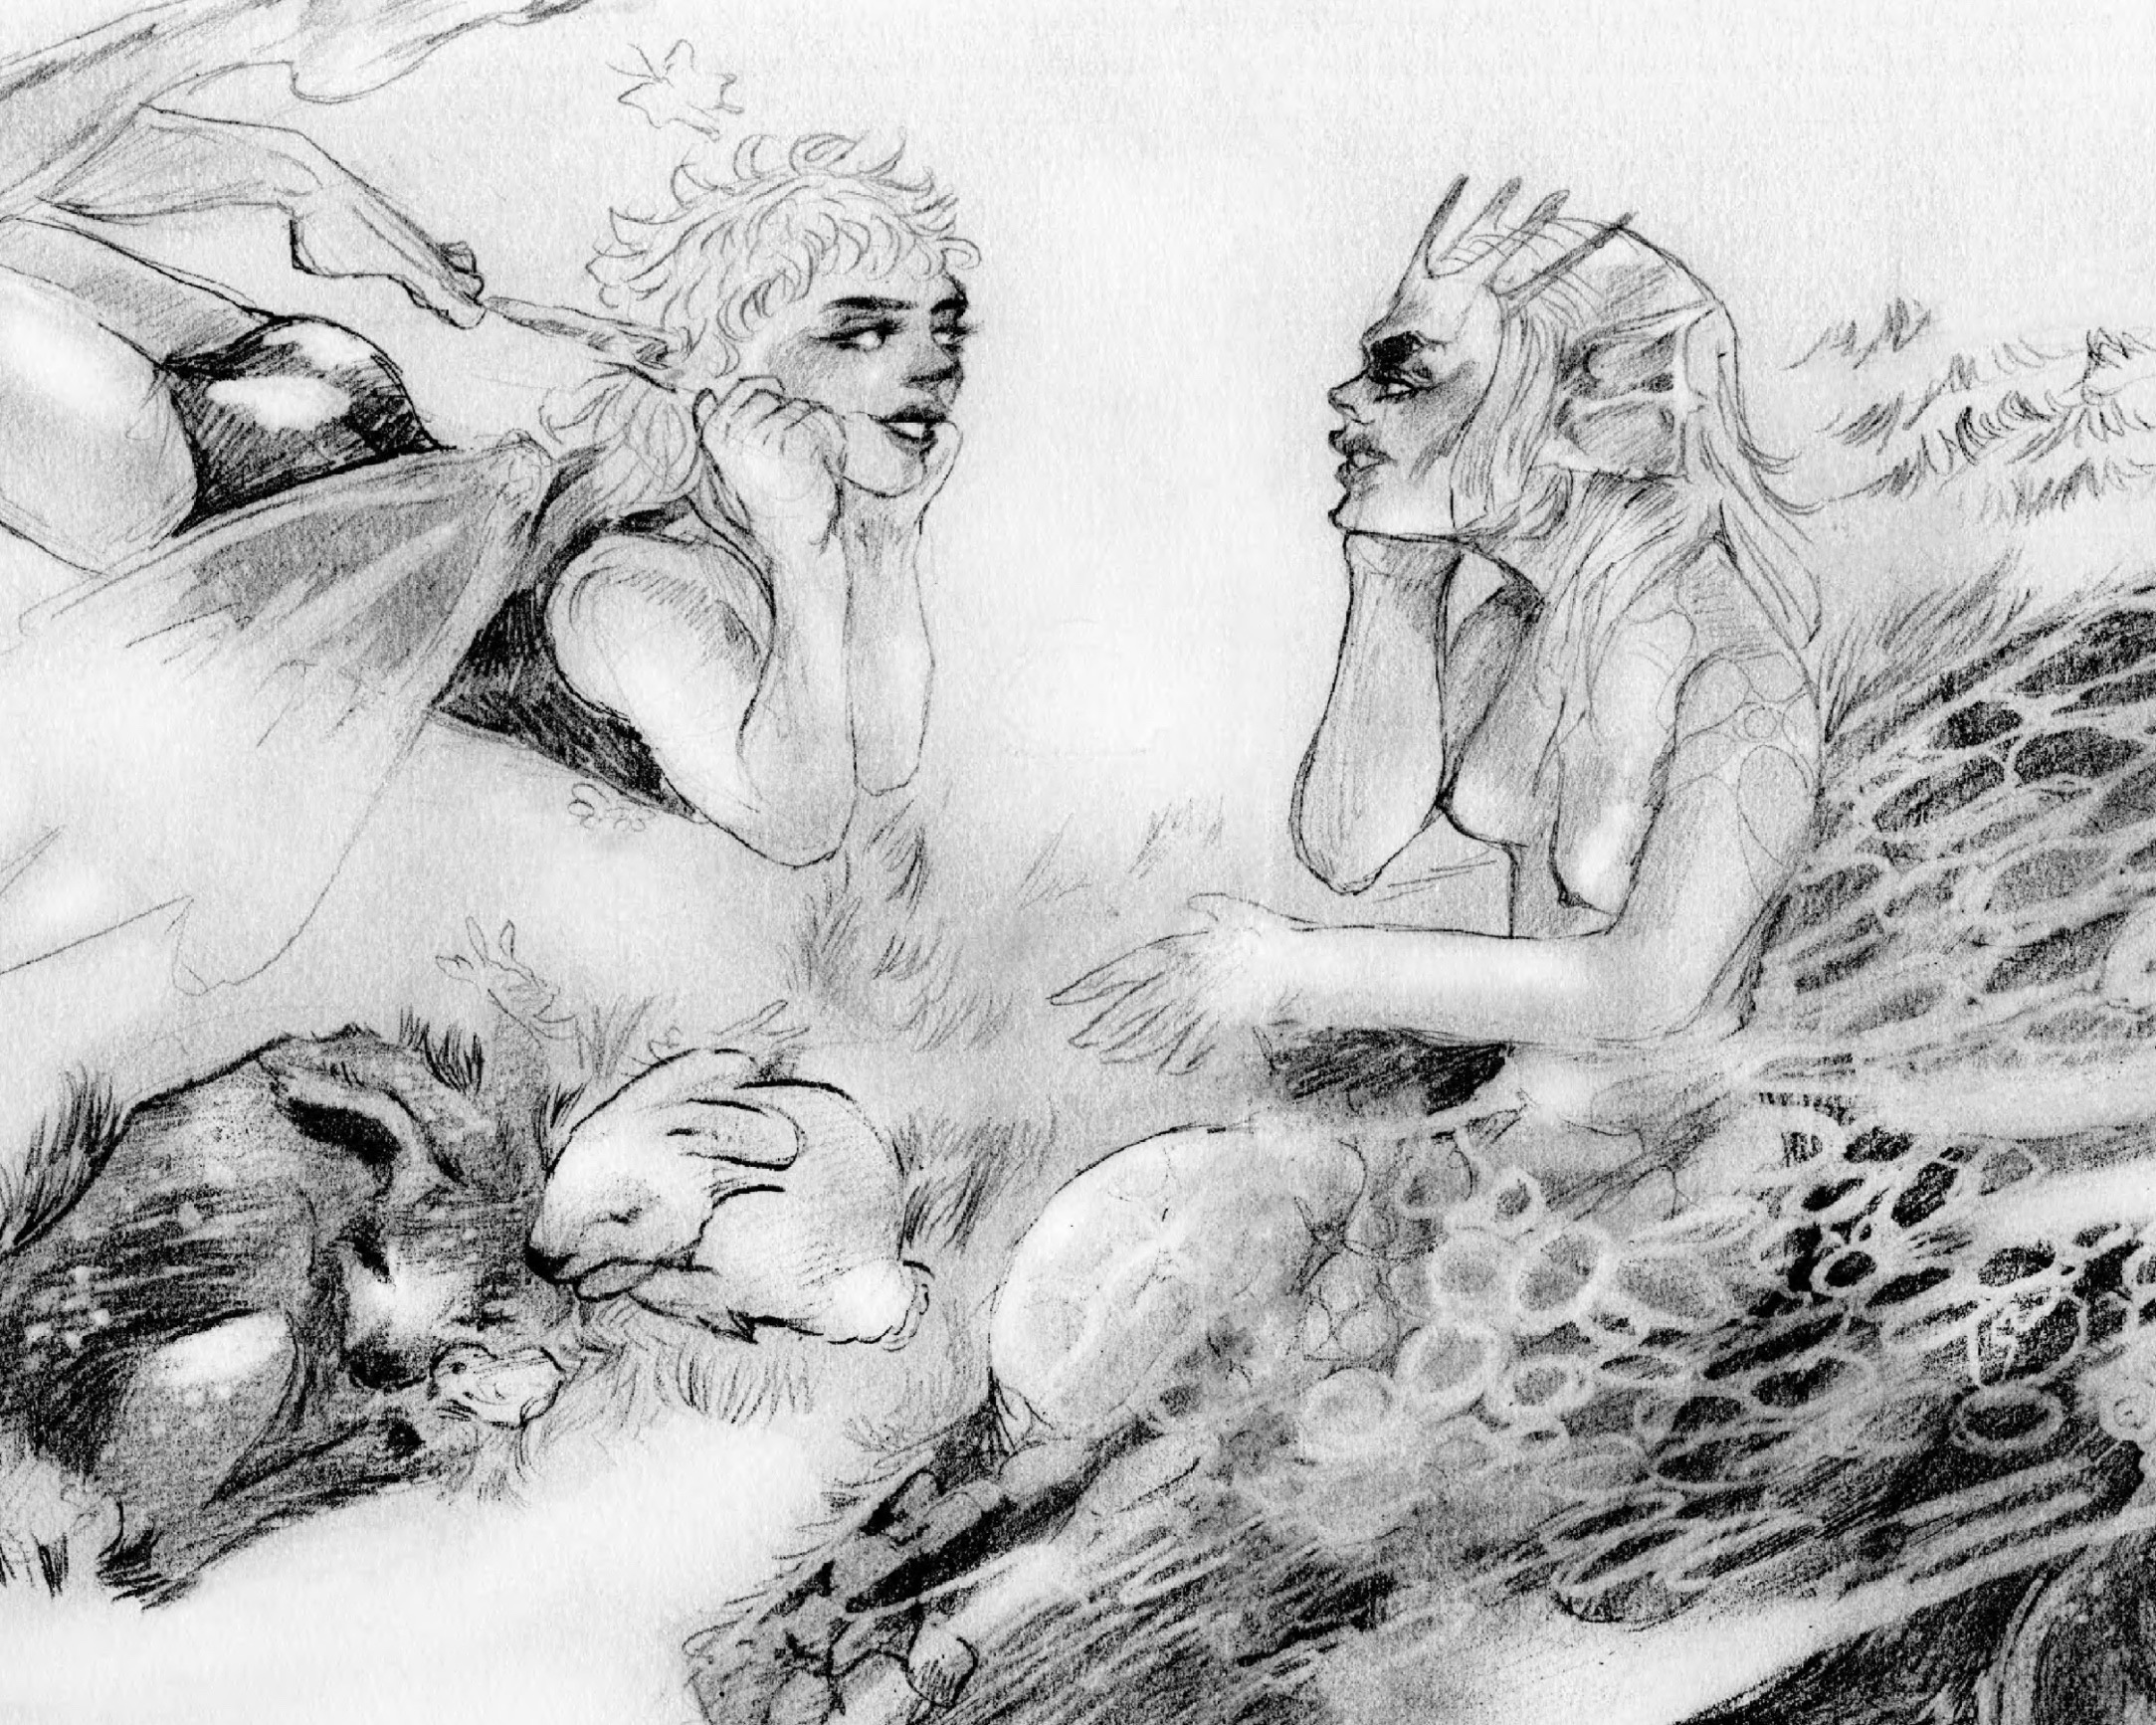 BA Illustration work by Camille Bakal showing a monotone black and white pencil sketch of a faerie and a mermaid gossiping surrounded by nature.